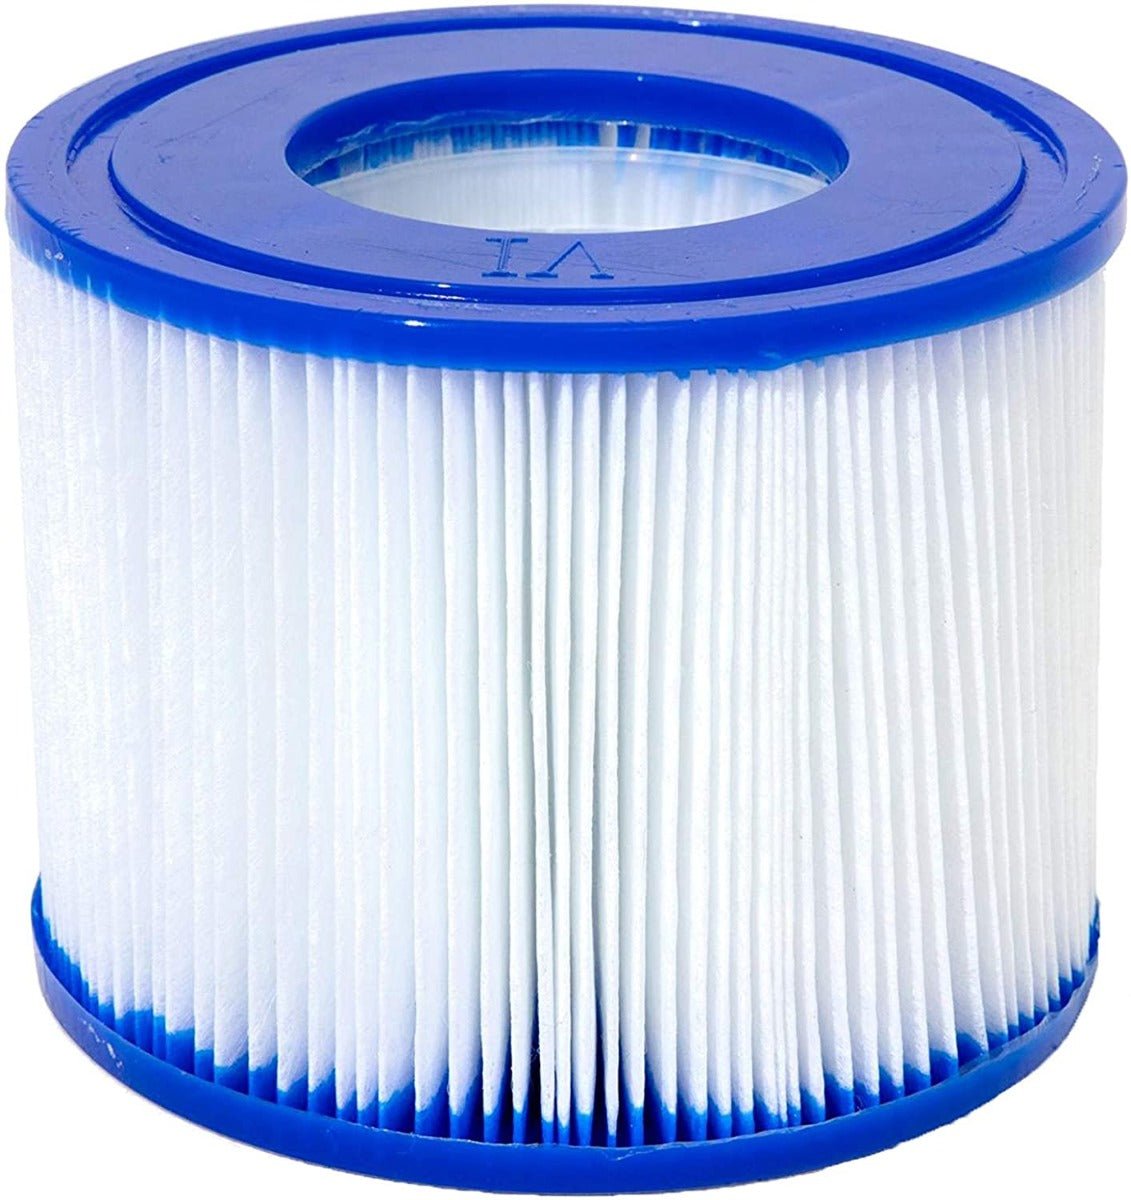 Lay-Z-Spa Filter Cartridge(VI) for Hot Tubs and Spa’s – BW60311